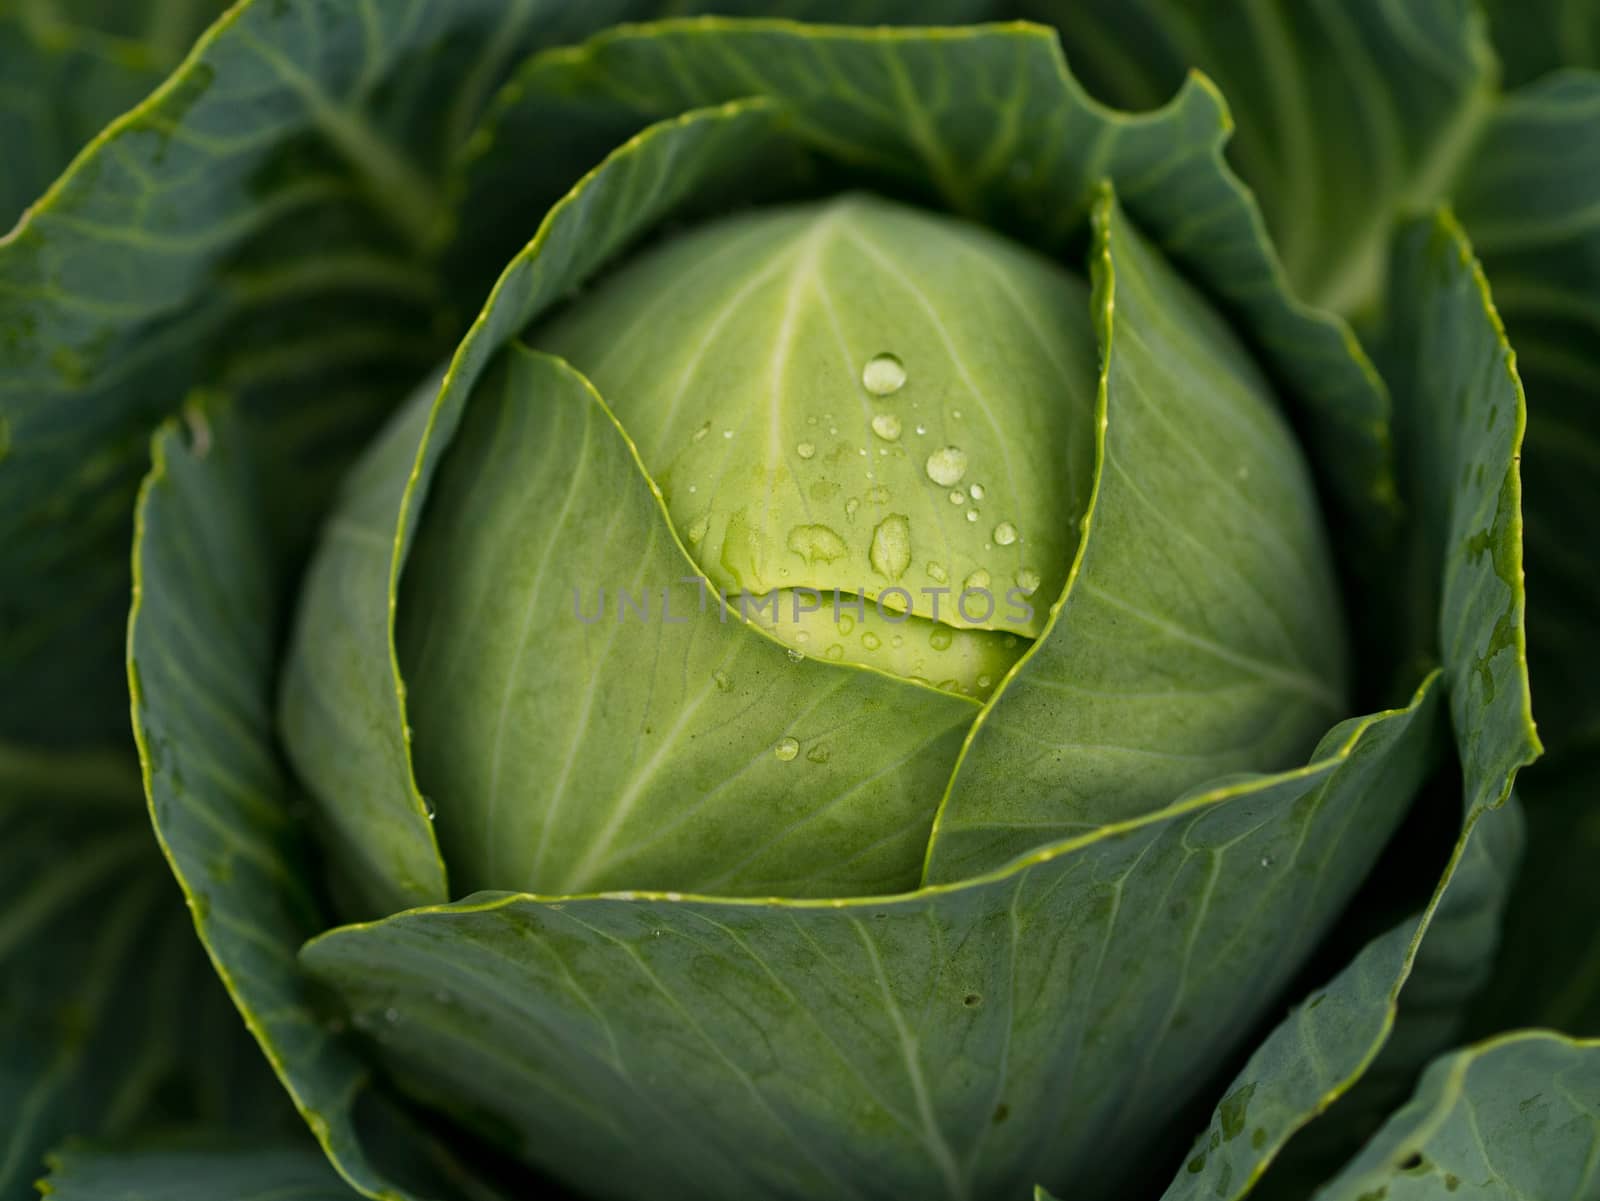 Cabbage growing at a farm field